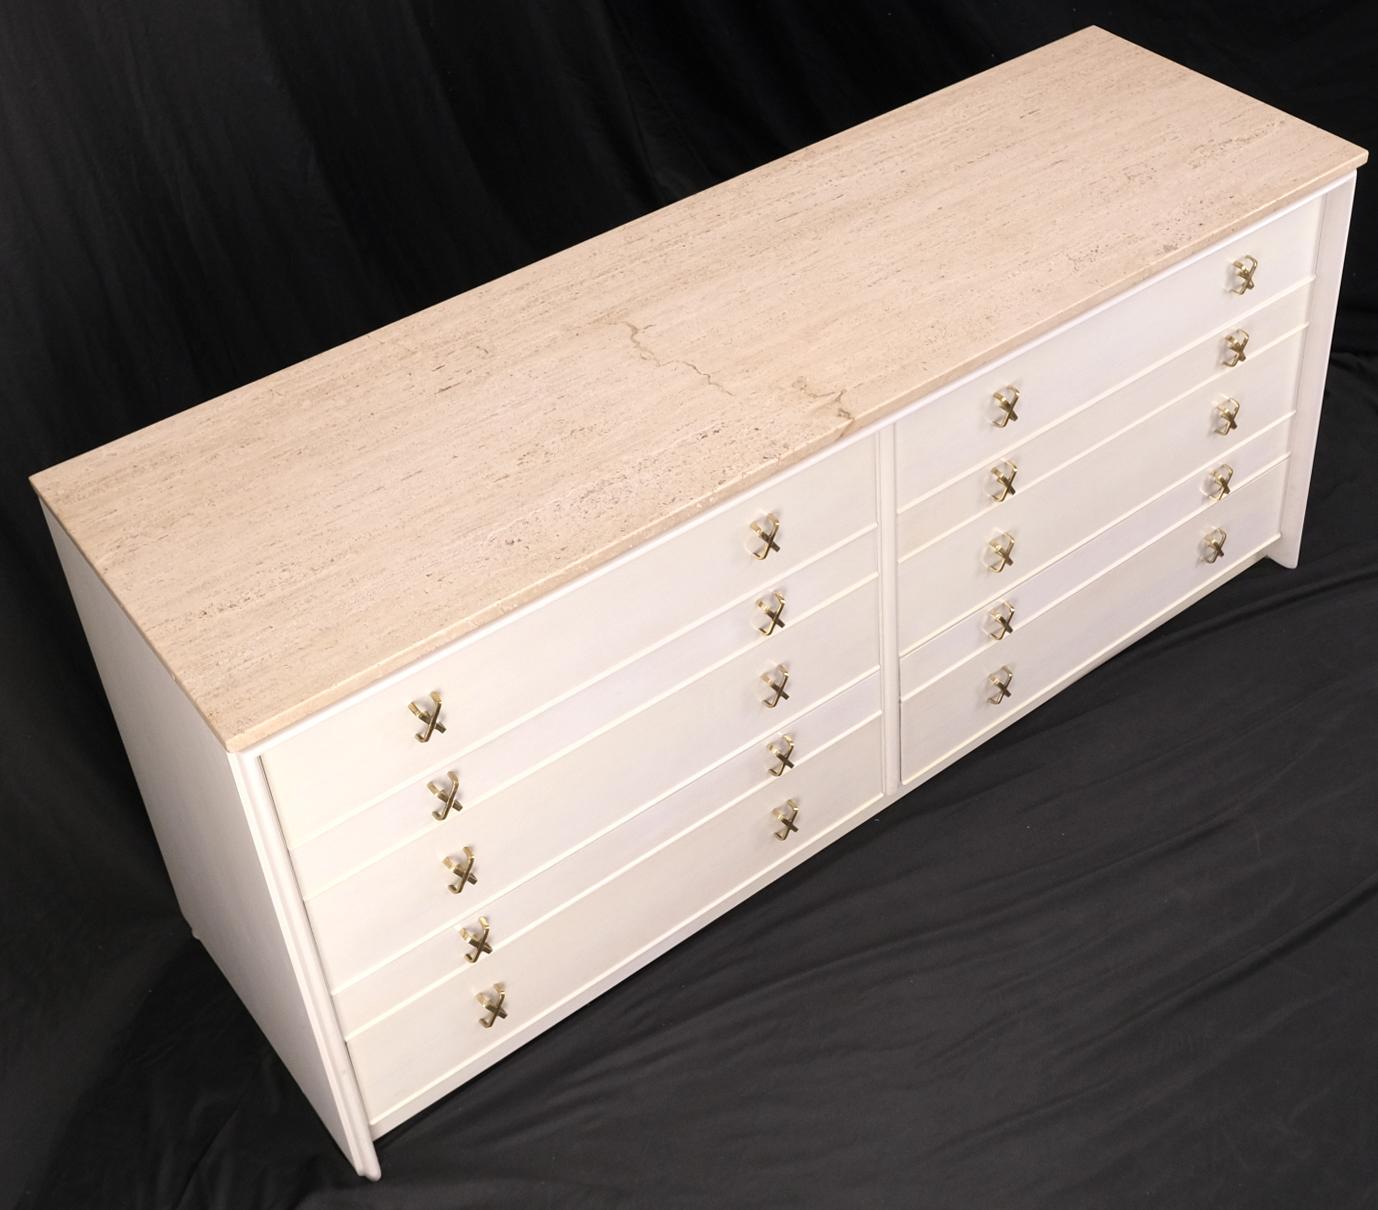 Lacquered Paul Frankl for Johnson White Wash Marble Top 10 Drawers Dresser Brass x Pulls For Sale